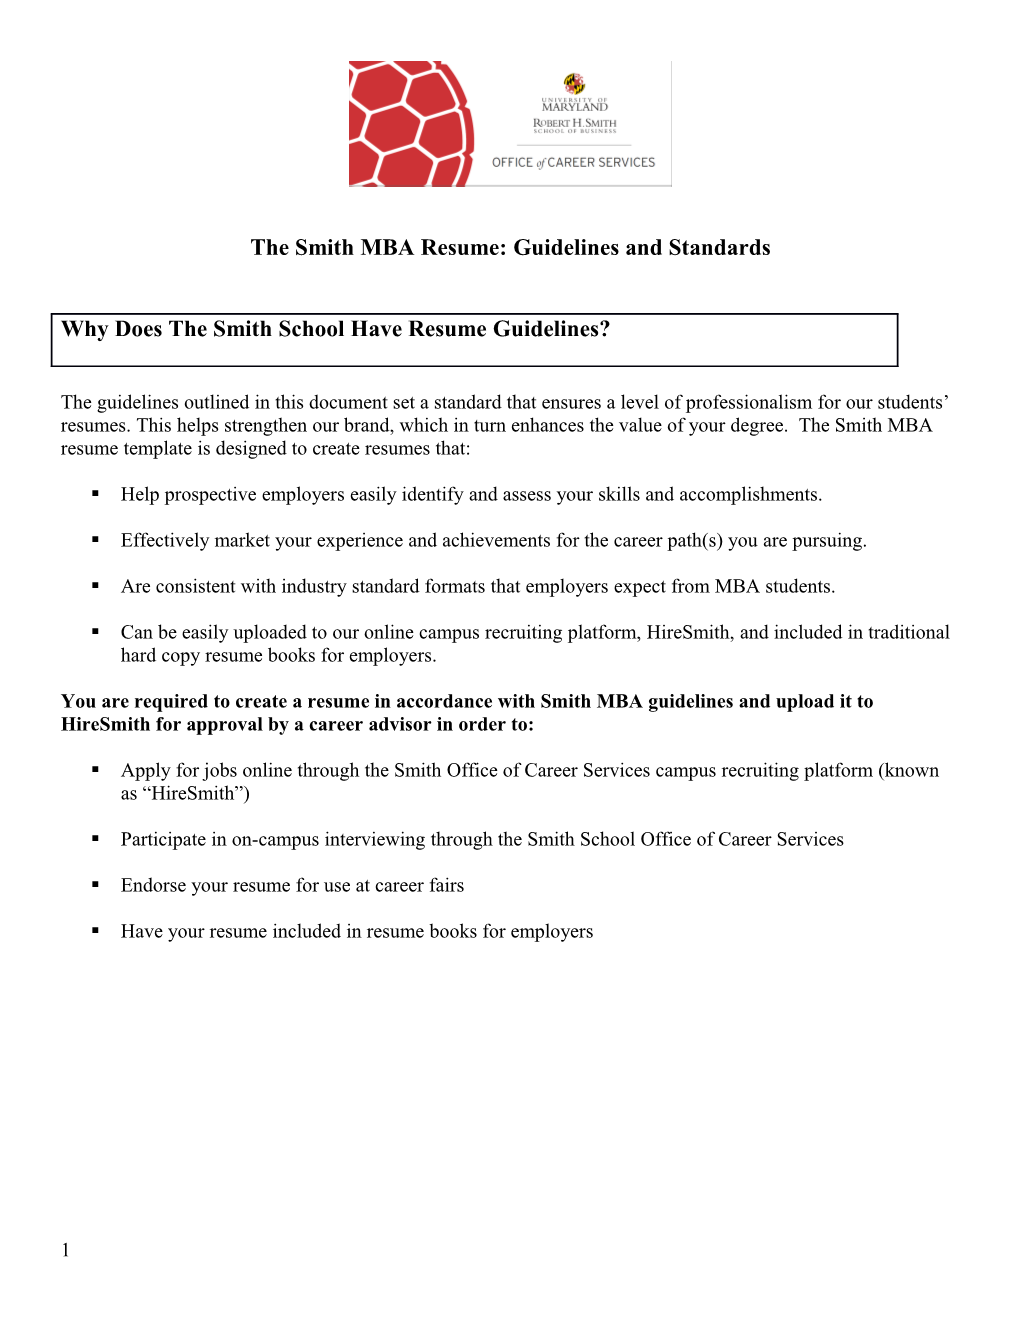 The Smith MBA Resume: Guidelines and Standards